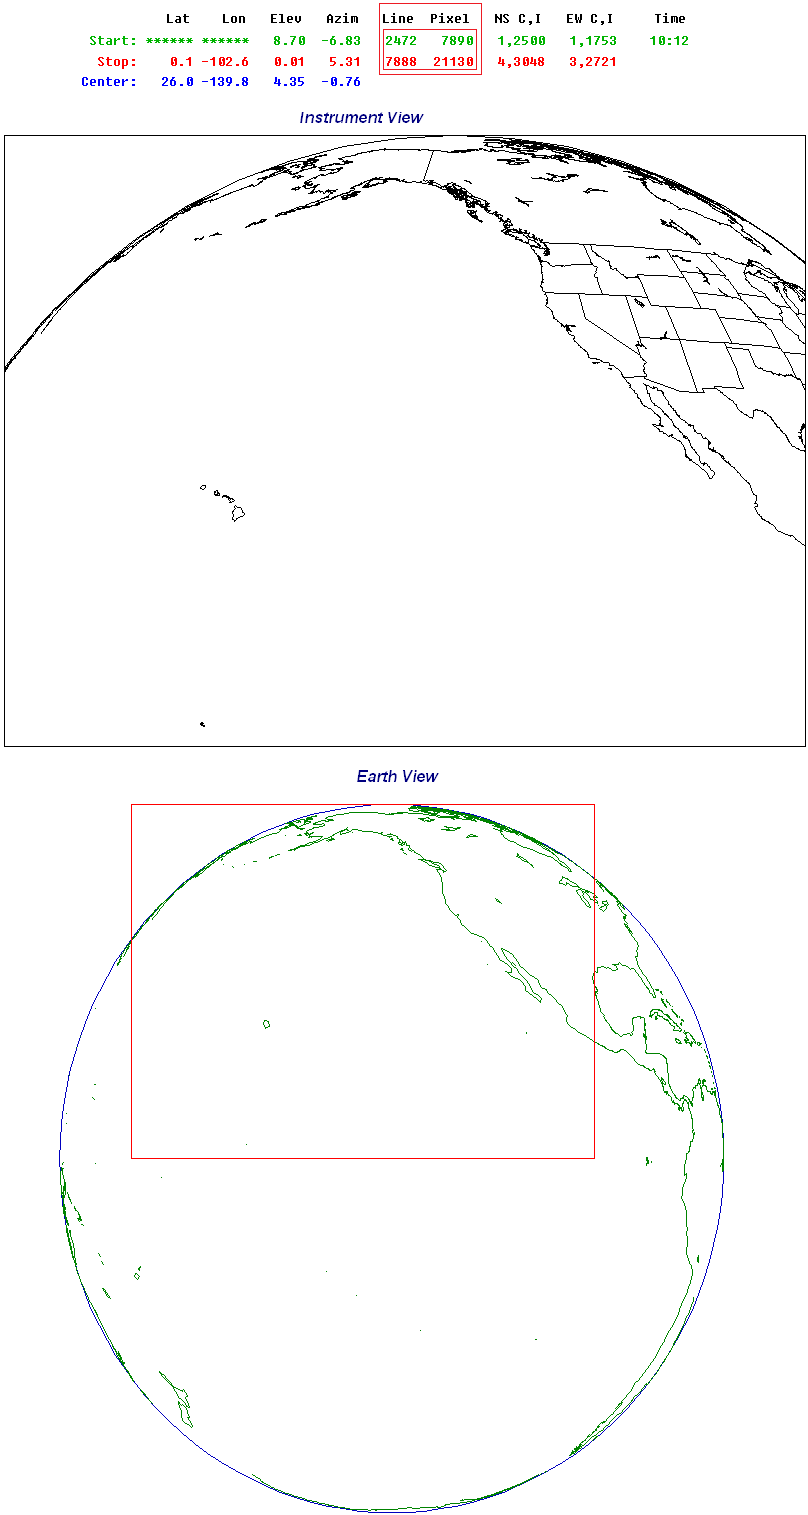 Depiction of Multiple Scaning strategies on Full Disk GOES-15 Footprint